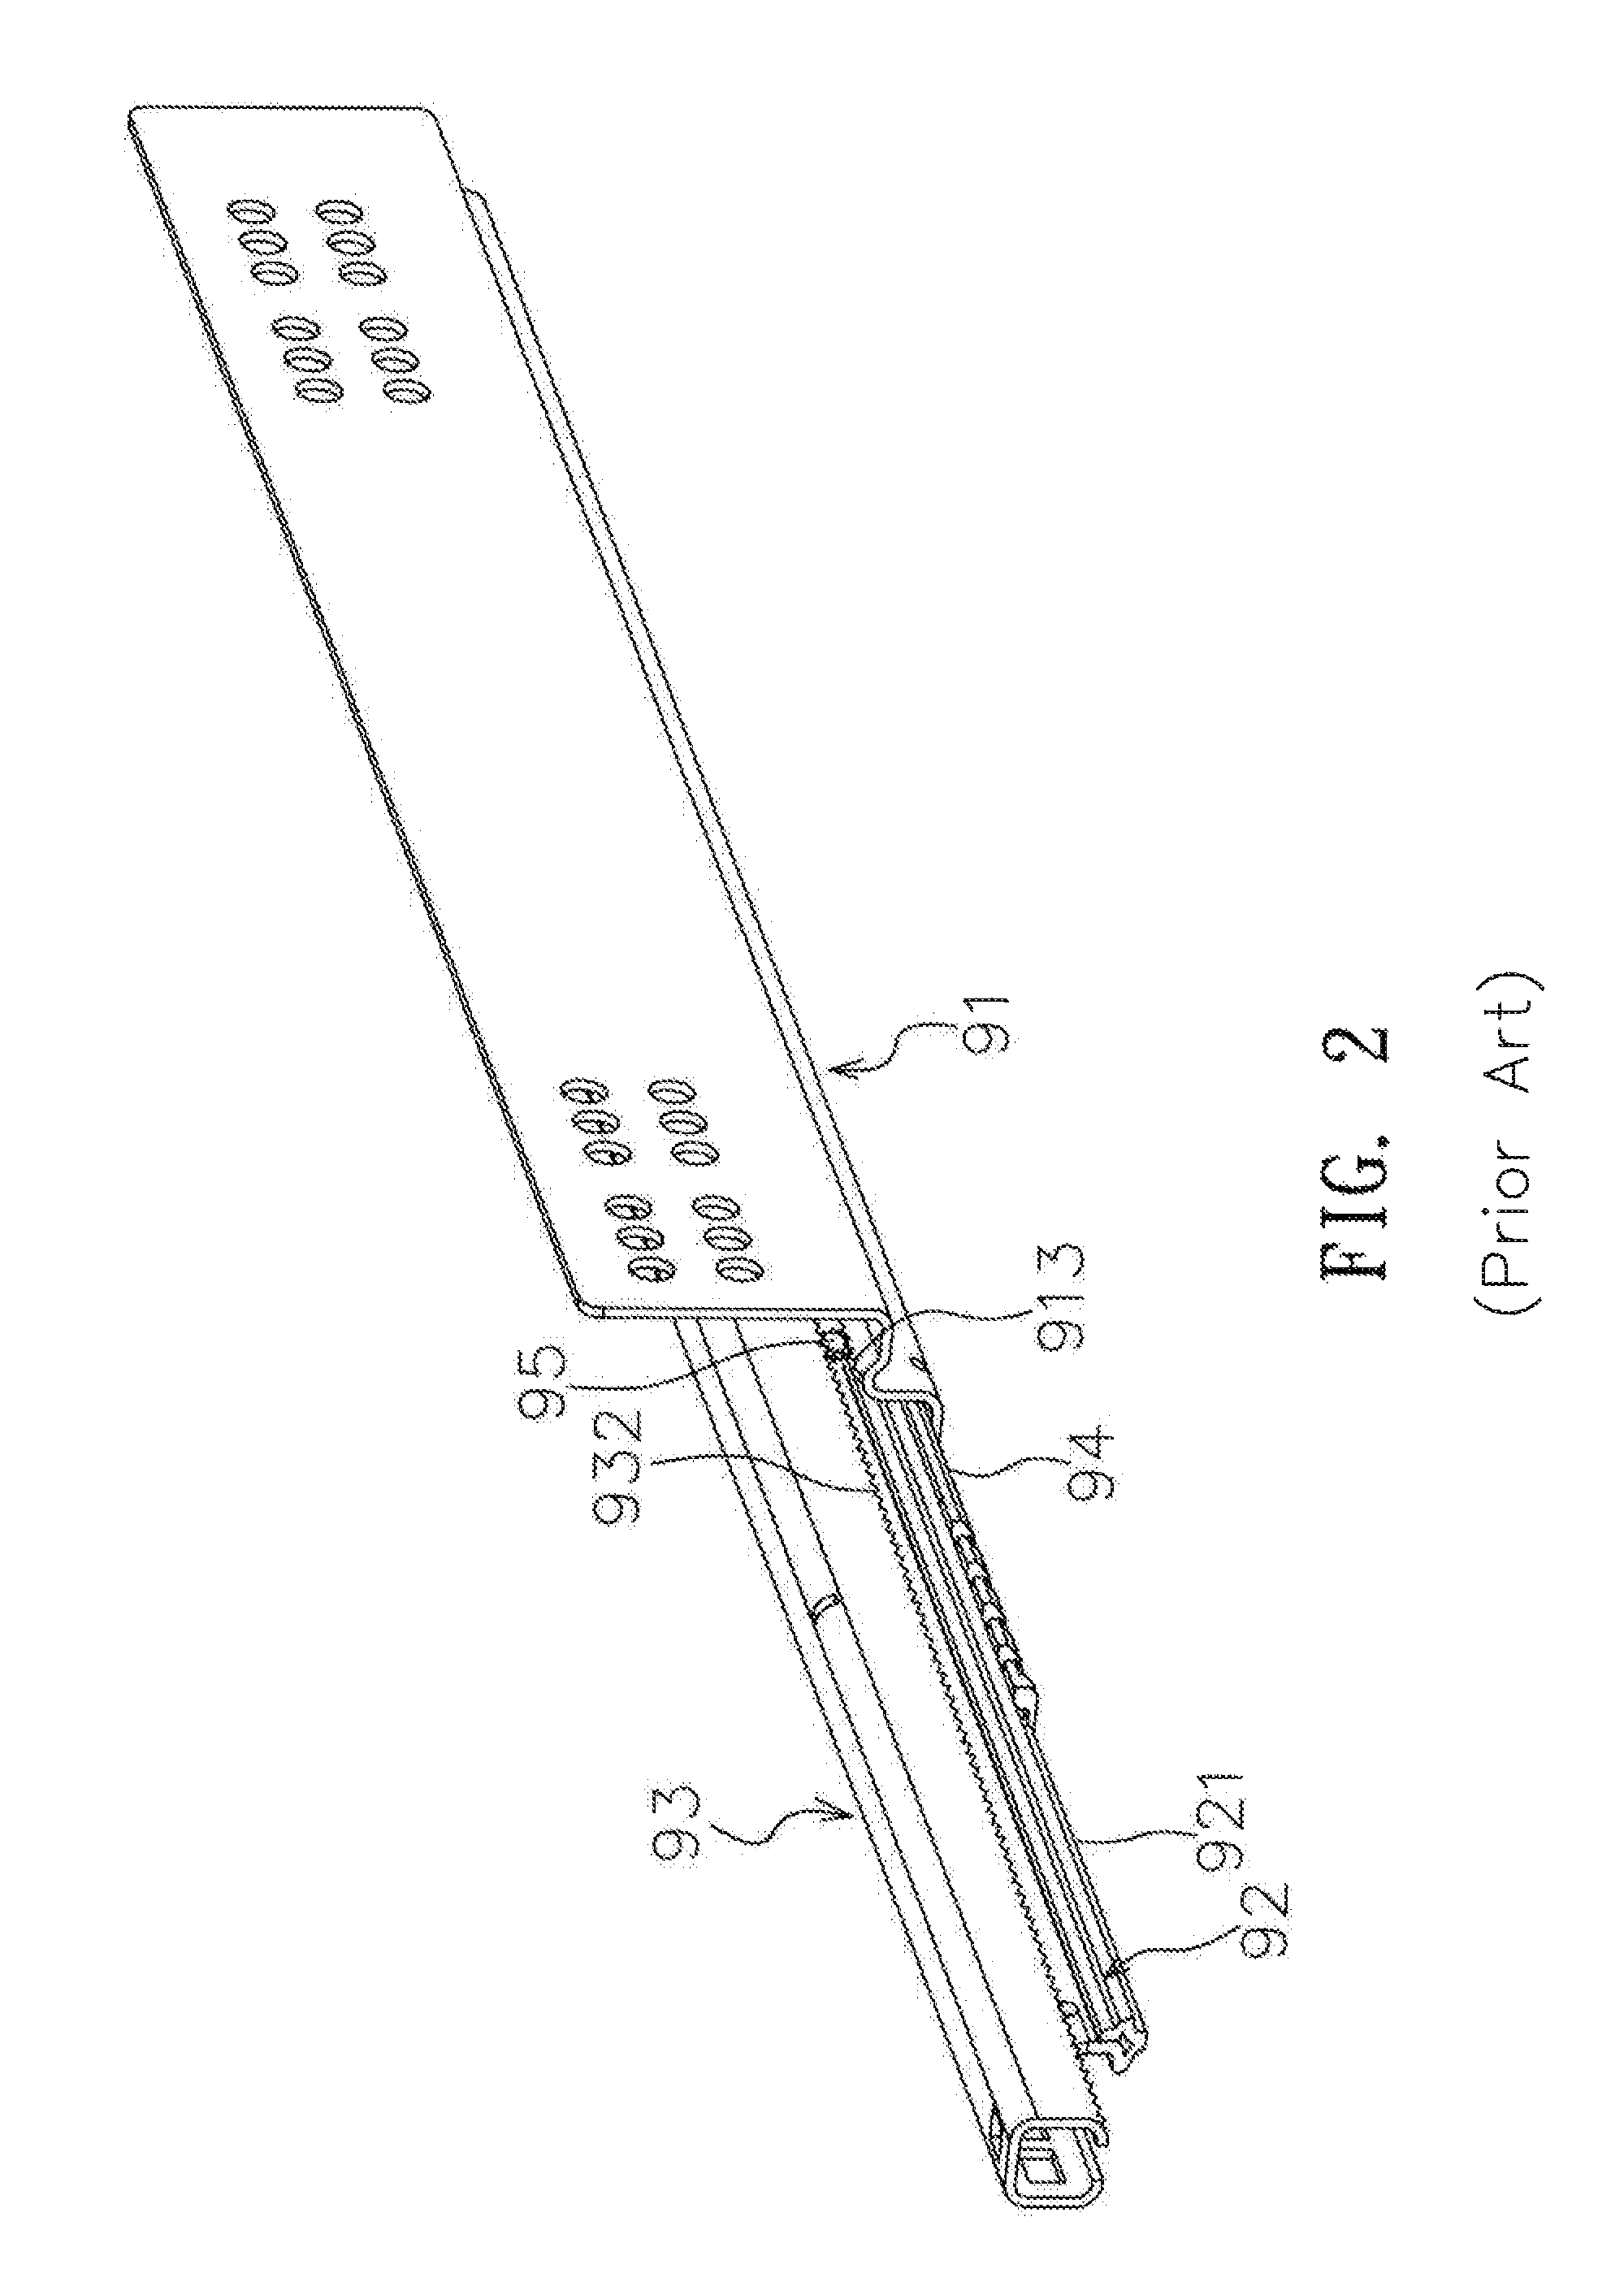 Track-based synchronous interlinking device